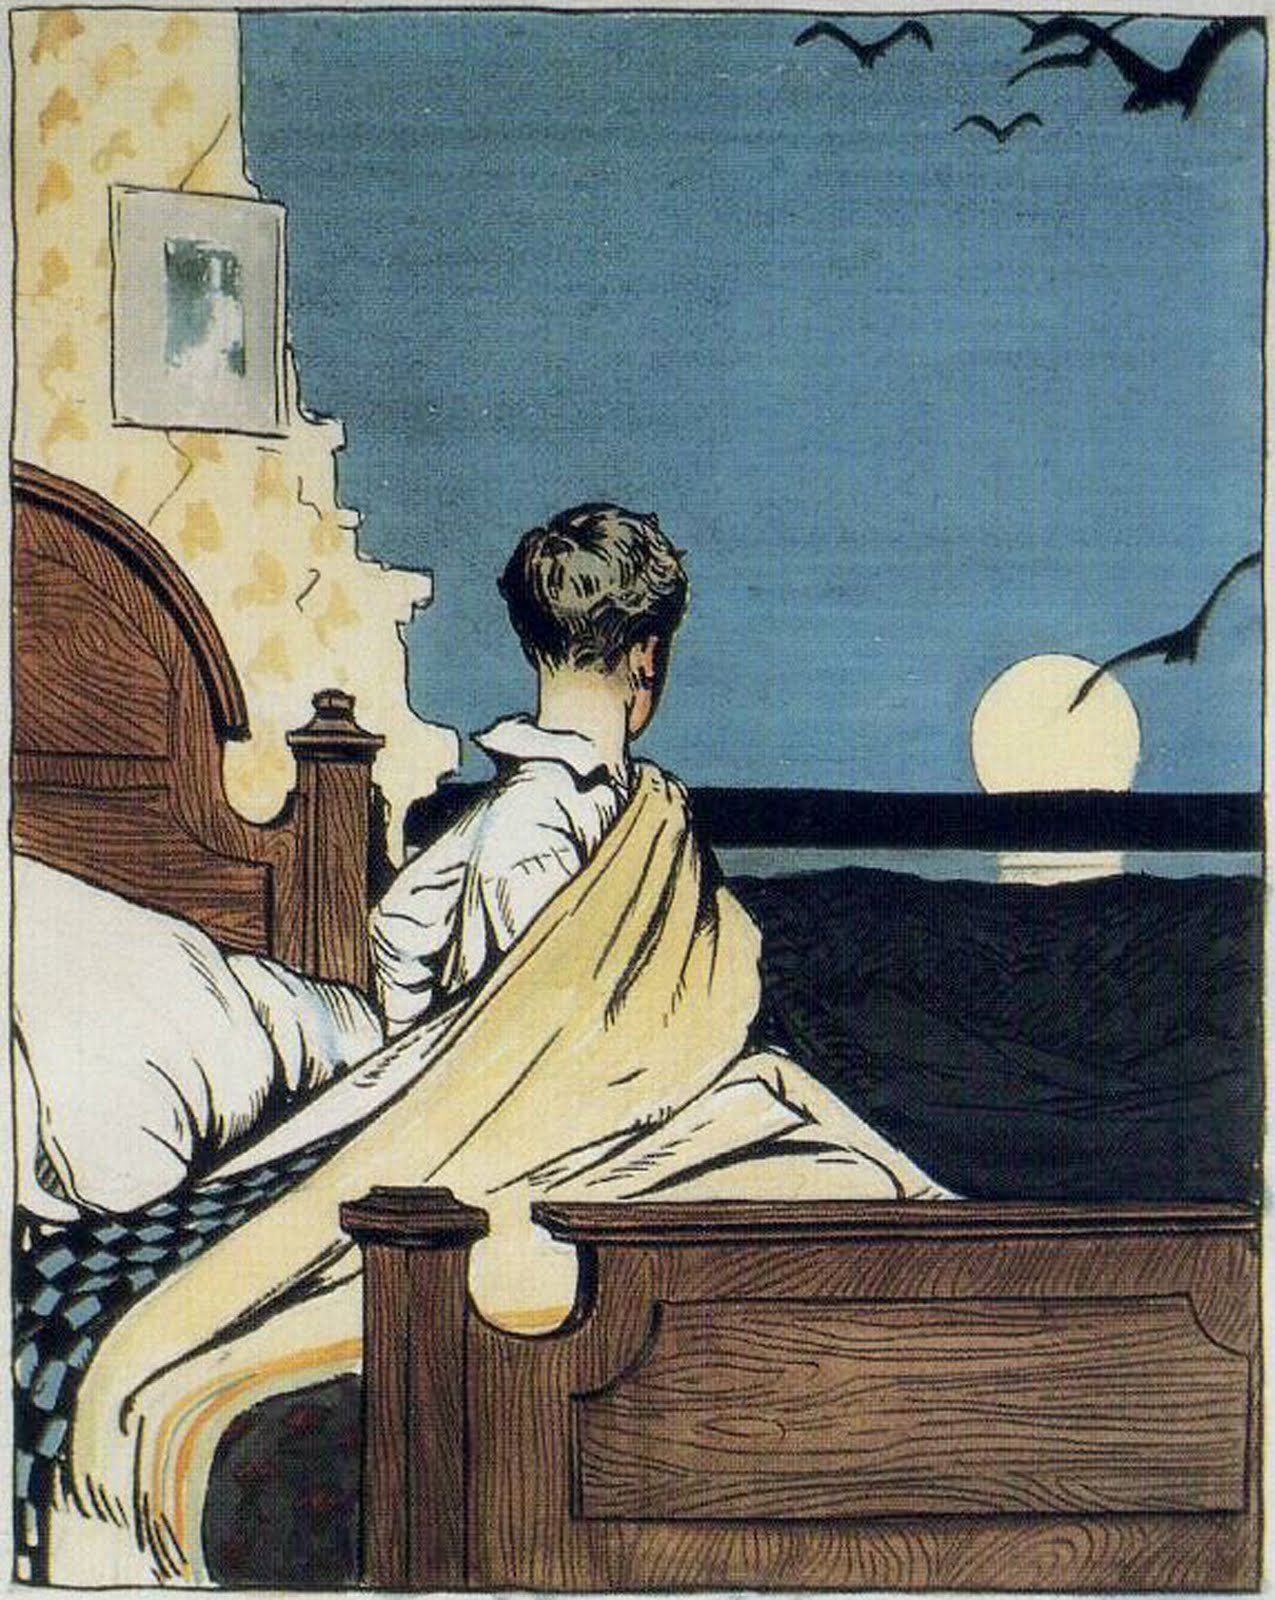 Boy and Moon by Edward Hopper - 1906-07 - 55.4 × 37.6 cm Whitney Museum of American Art